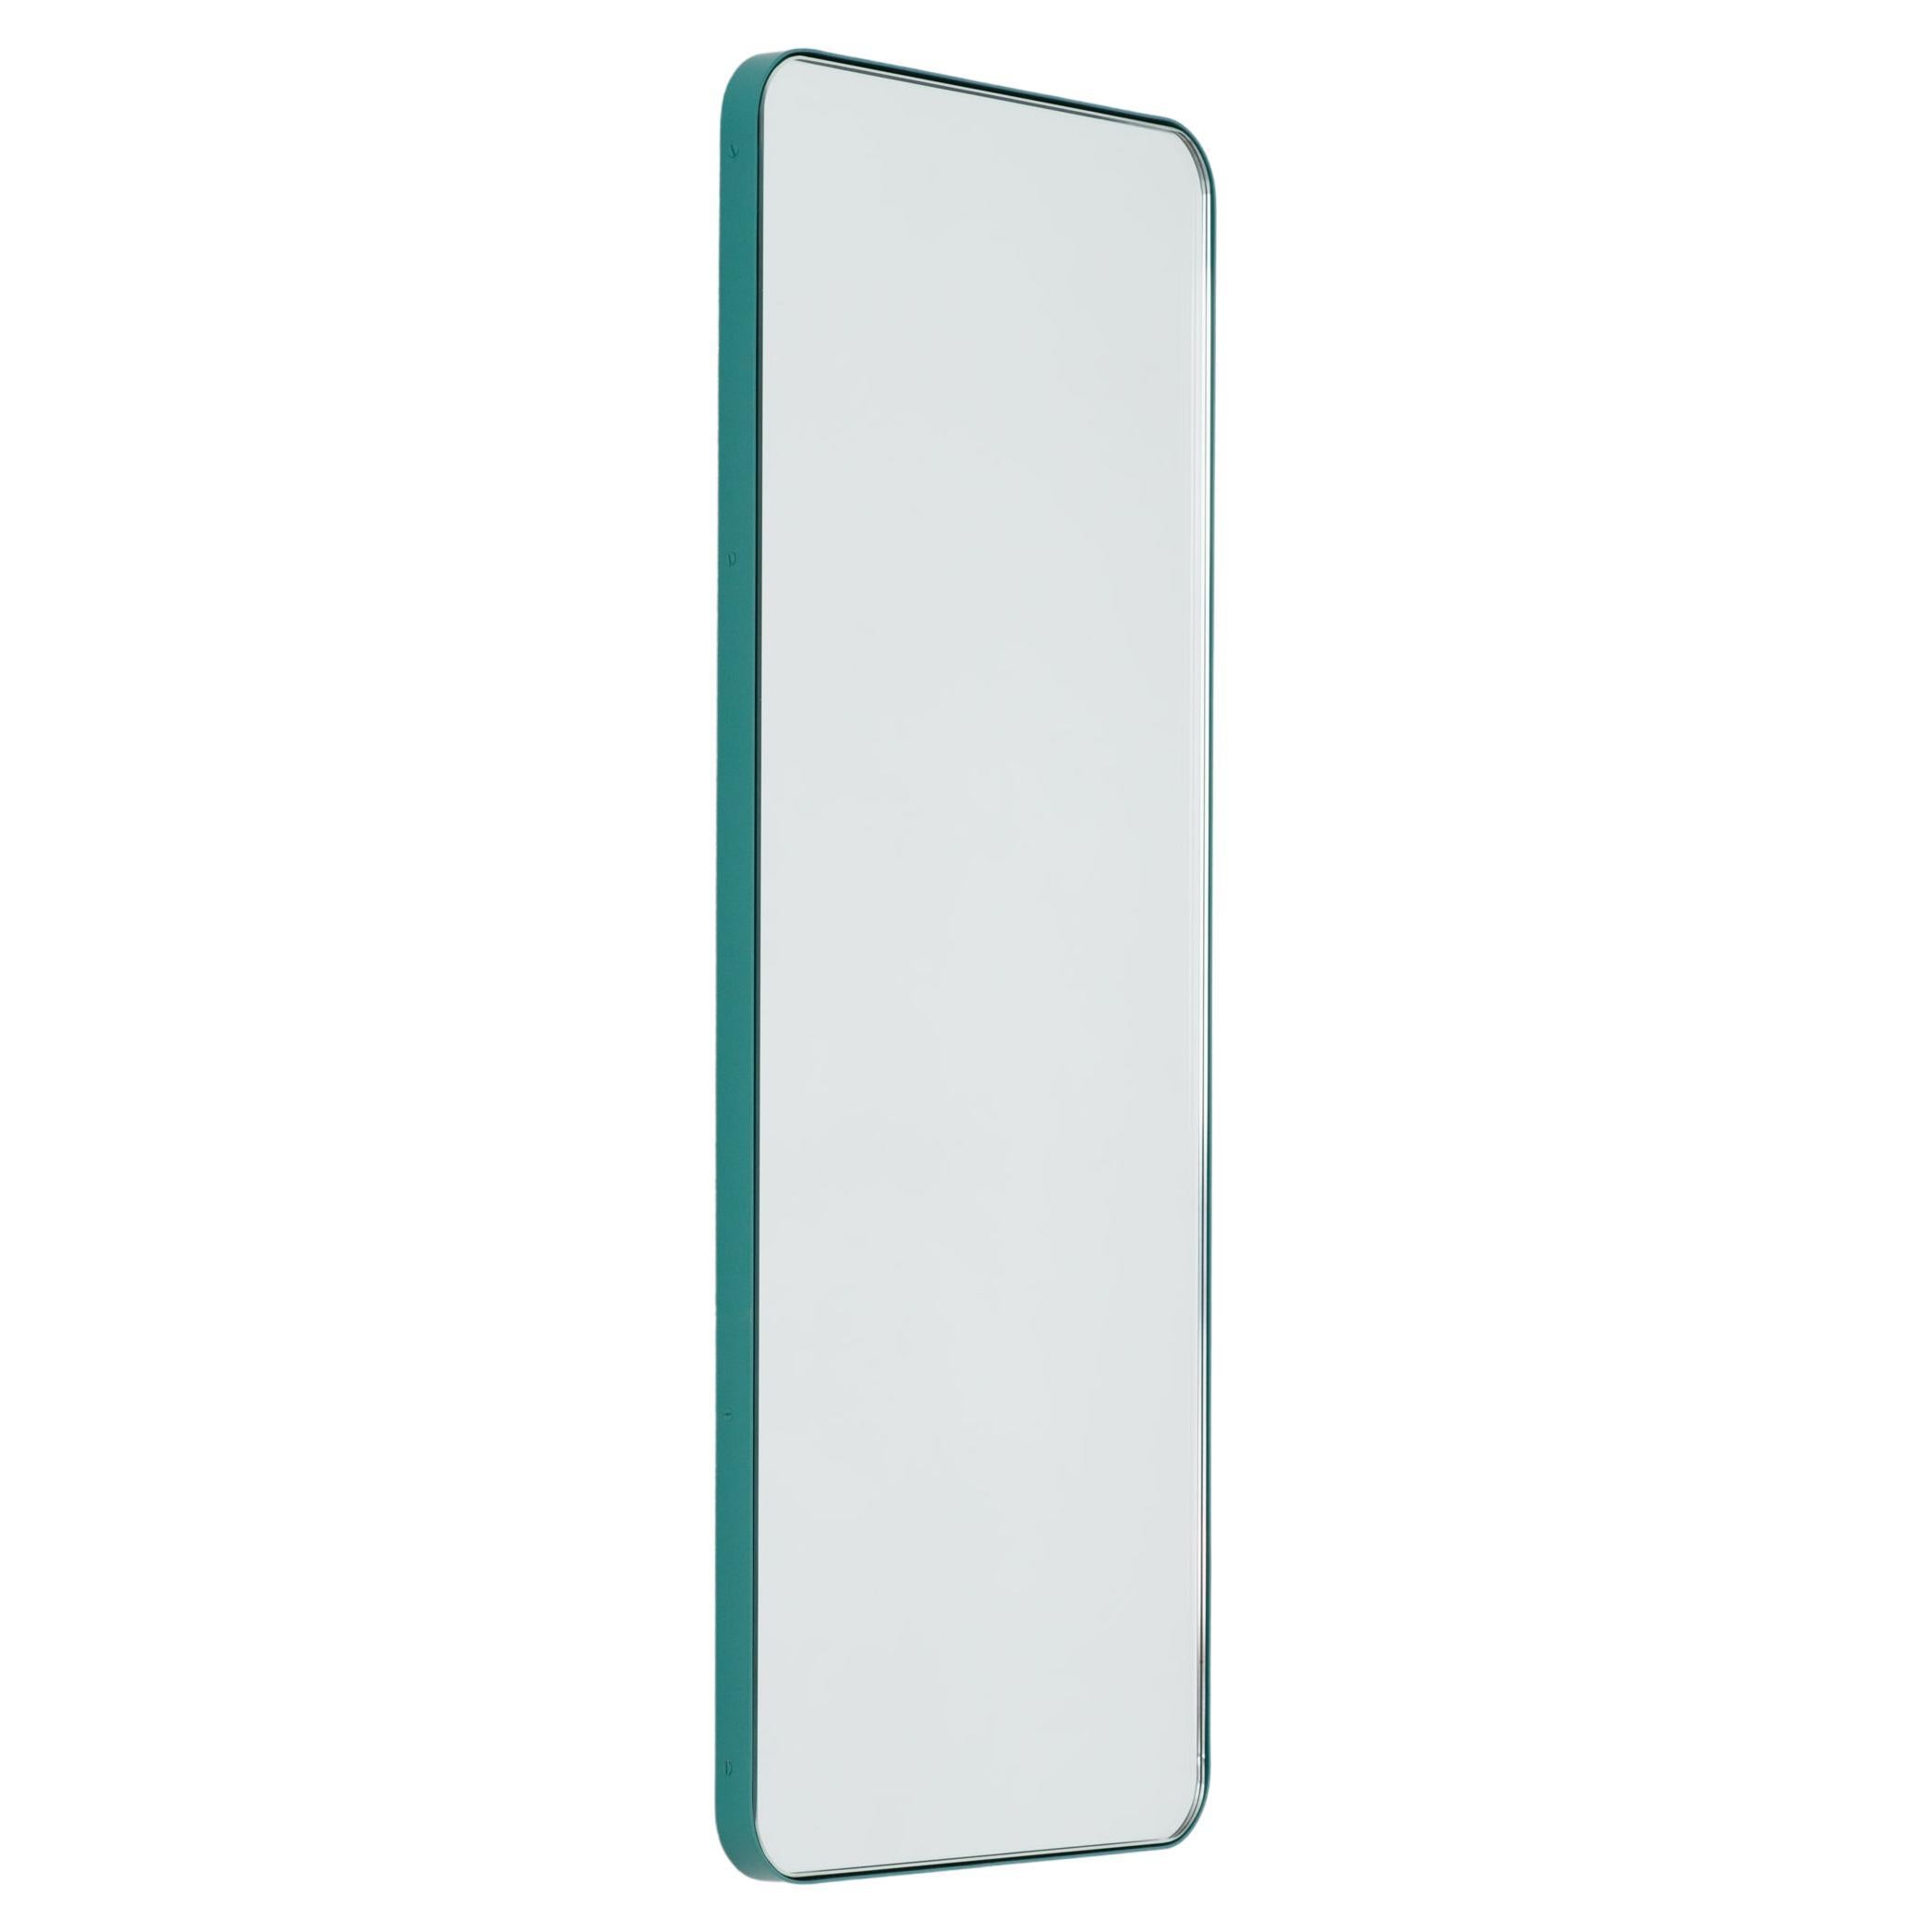 Ready to Ship Quadris Rectangular Mirror with Mint Turquoise Frame, Small